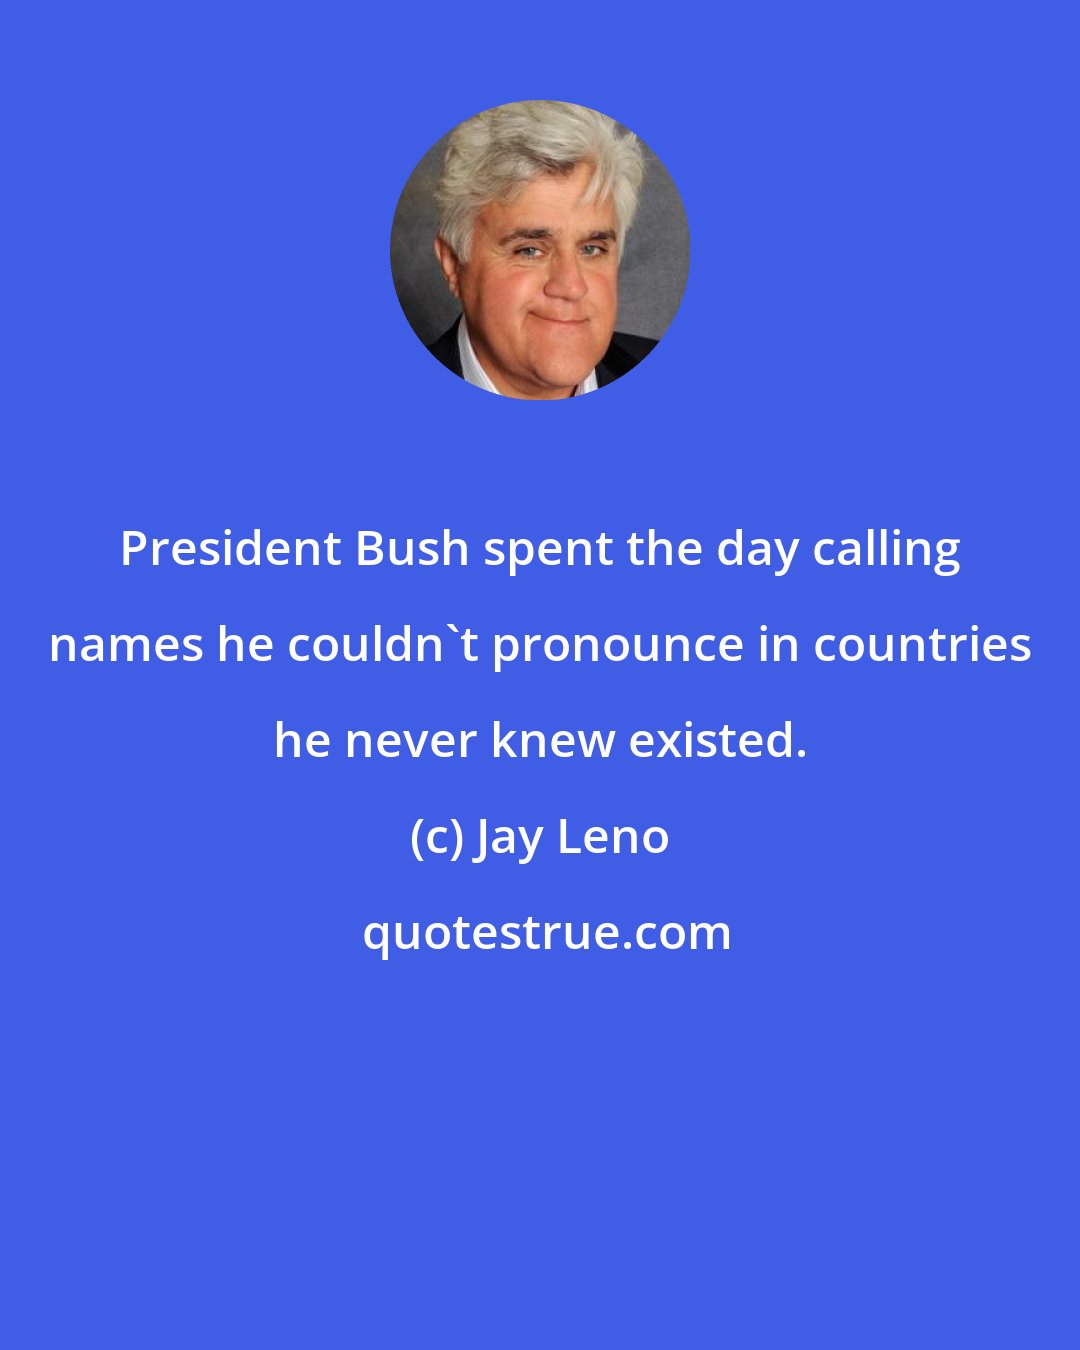 Jay Leno: President Bush spent the day calling names he couldn't pronounce in countries he never knew existed.